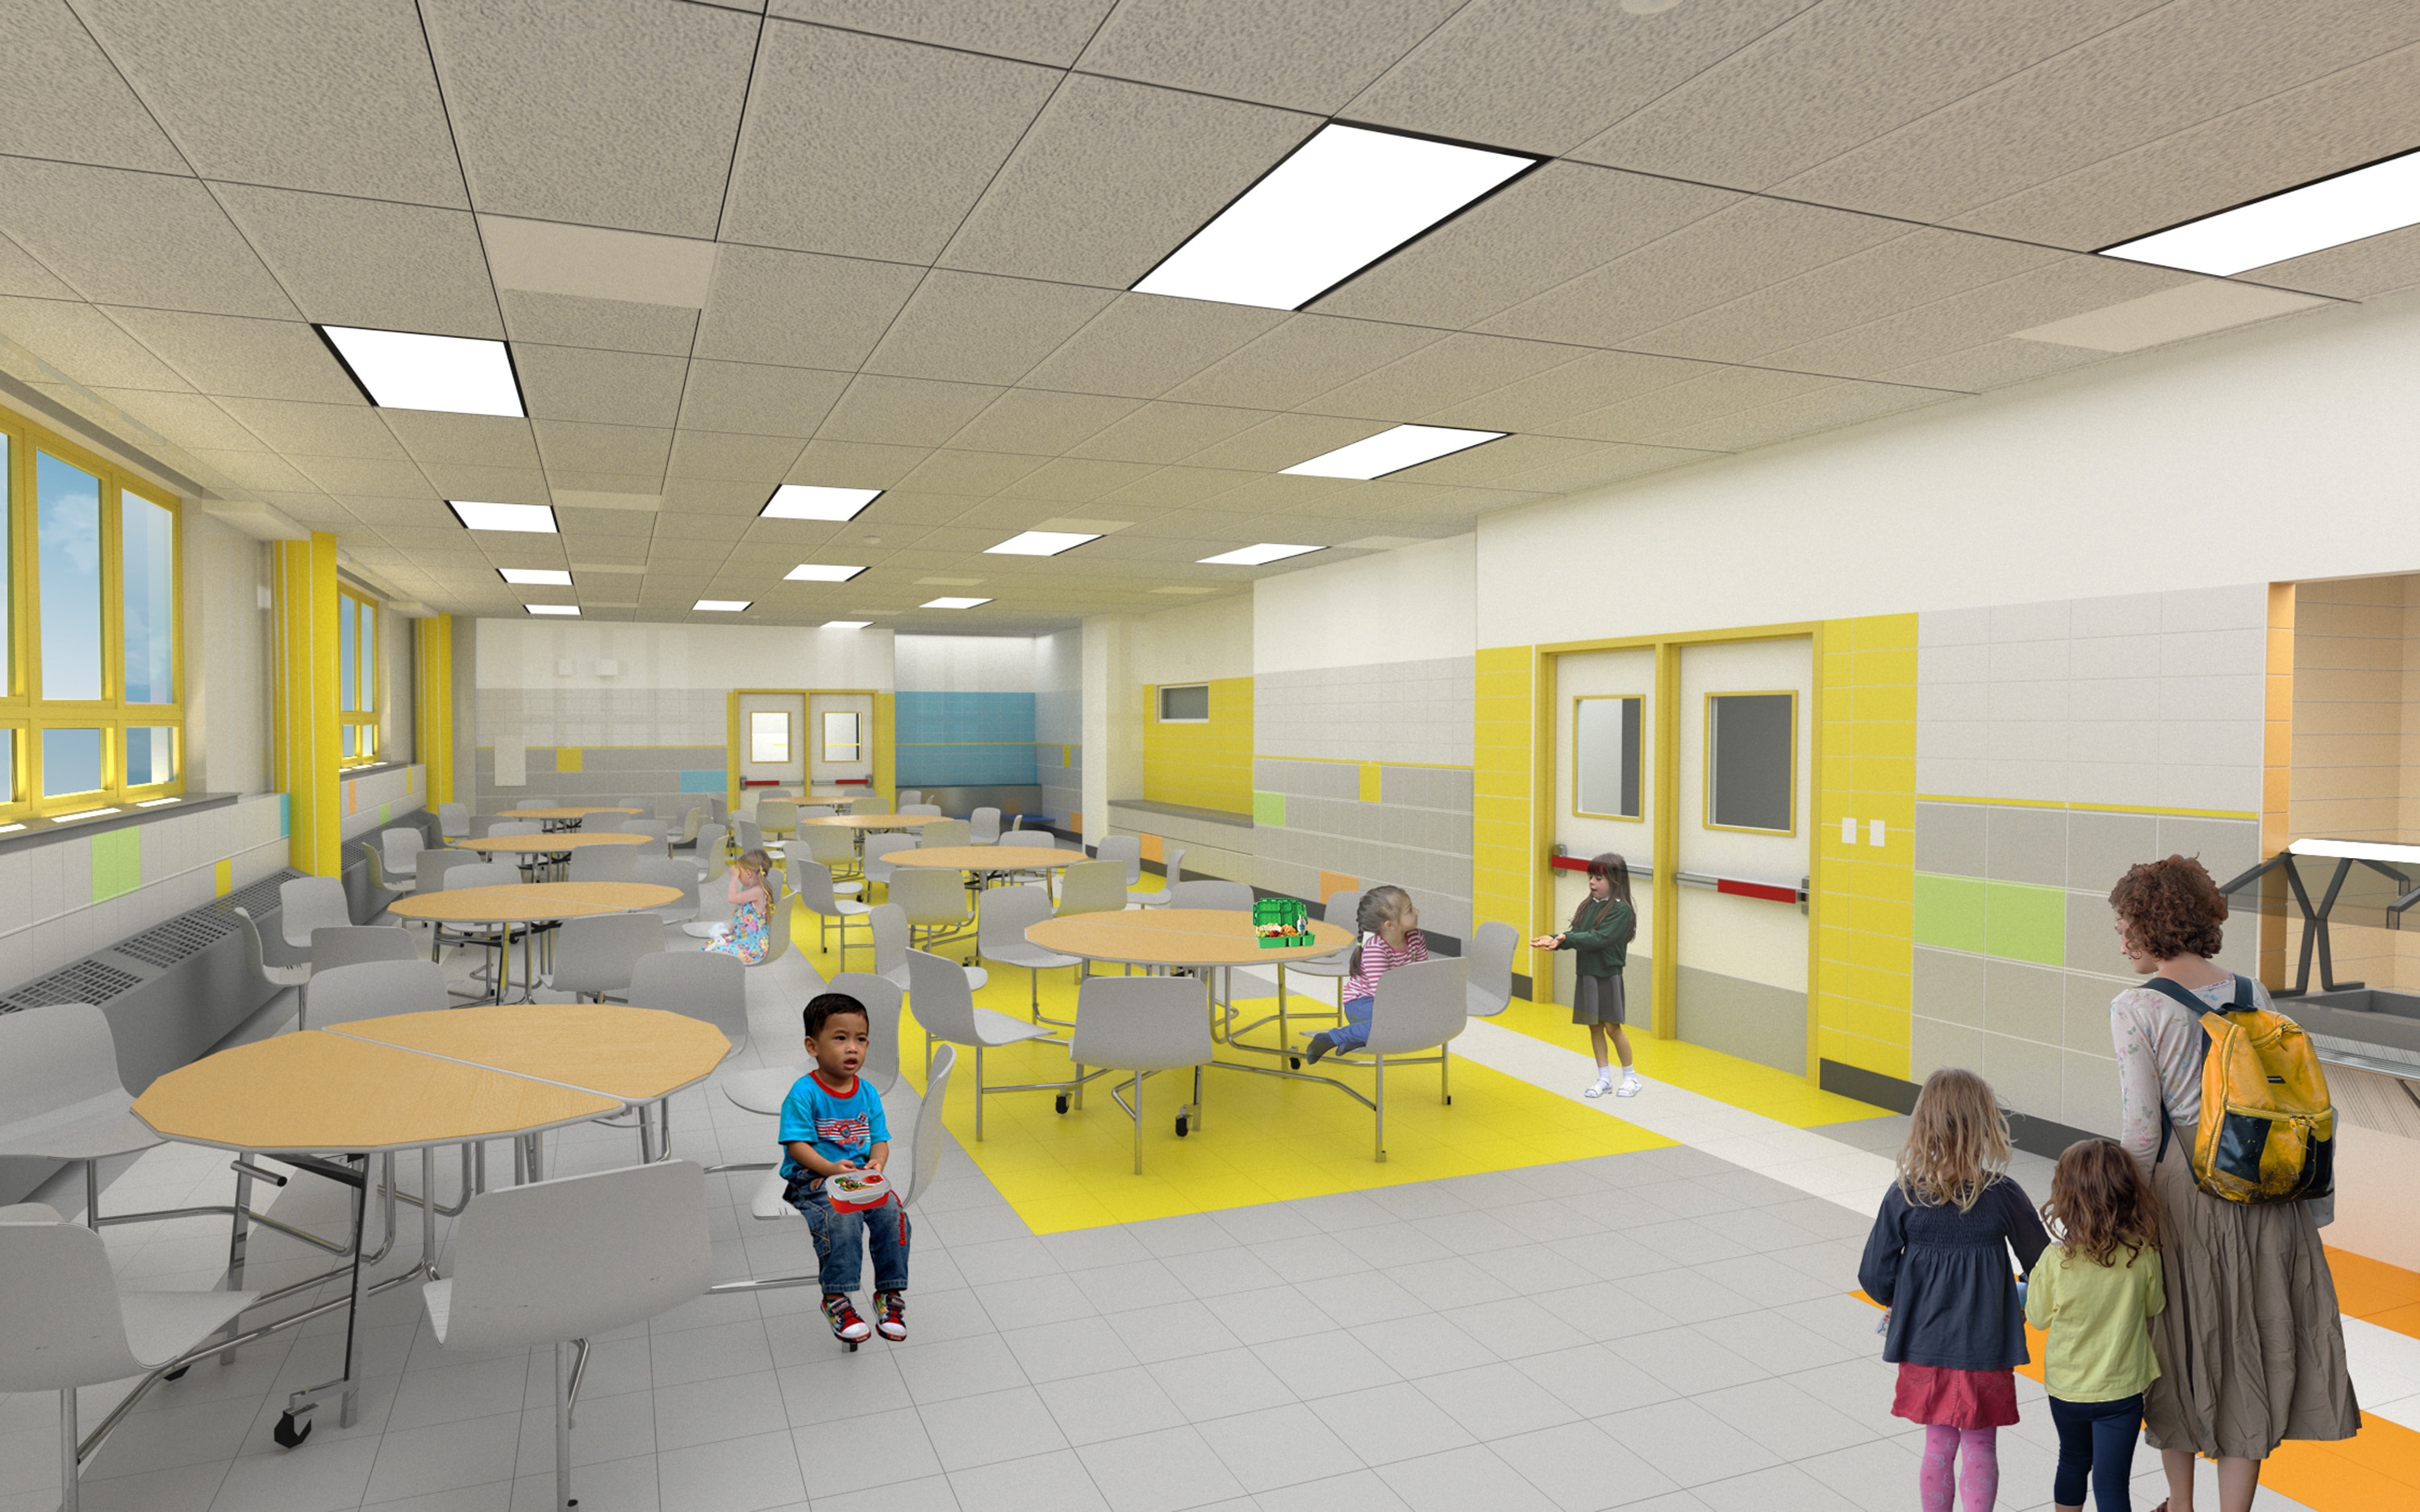 cafeteria rendering with colorful design details